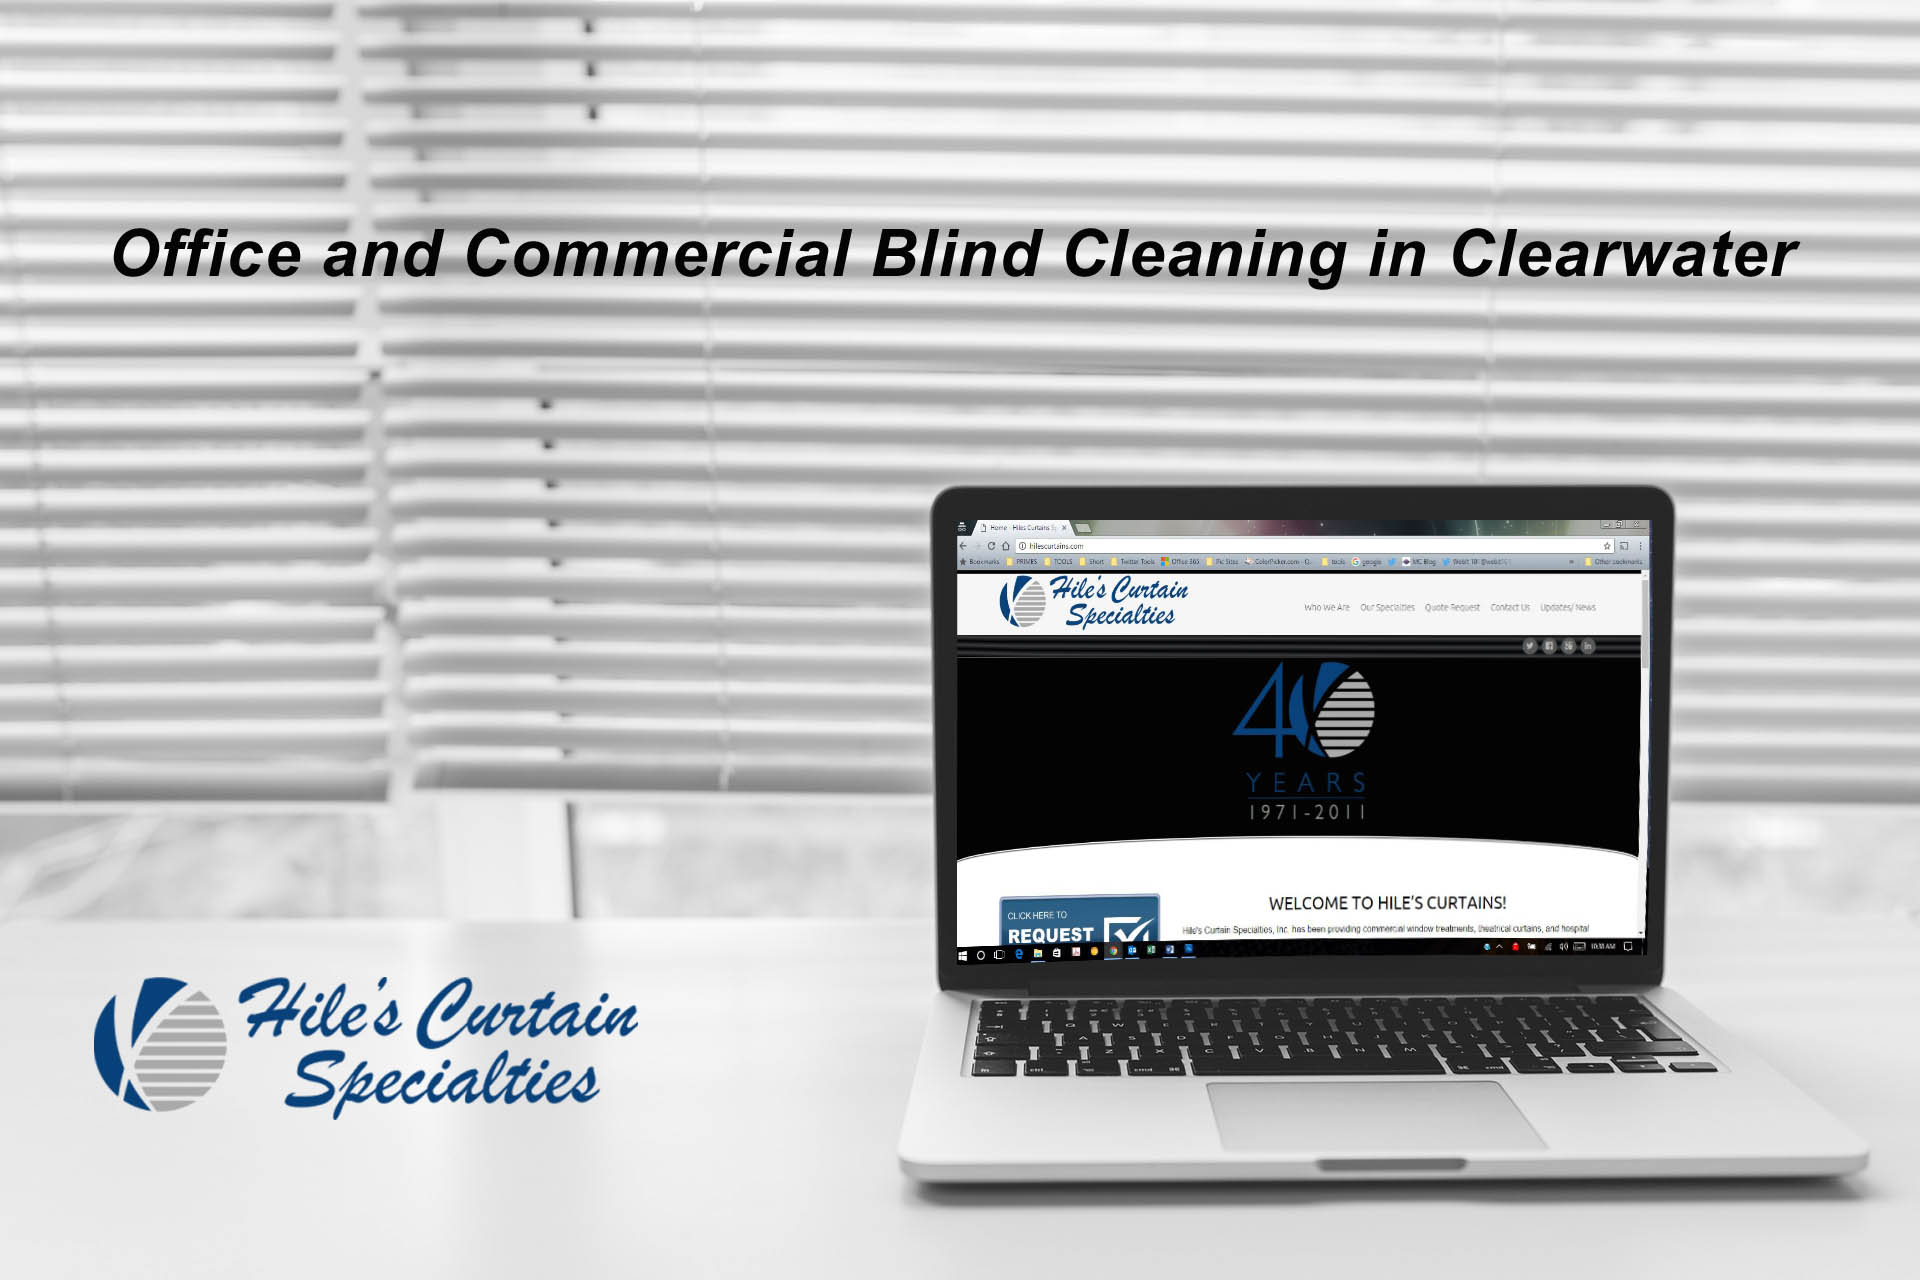 Office and Commercial Blind Cleaning in Clearwater